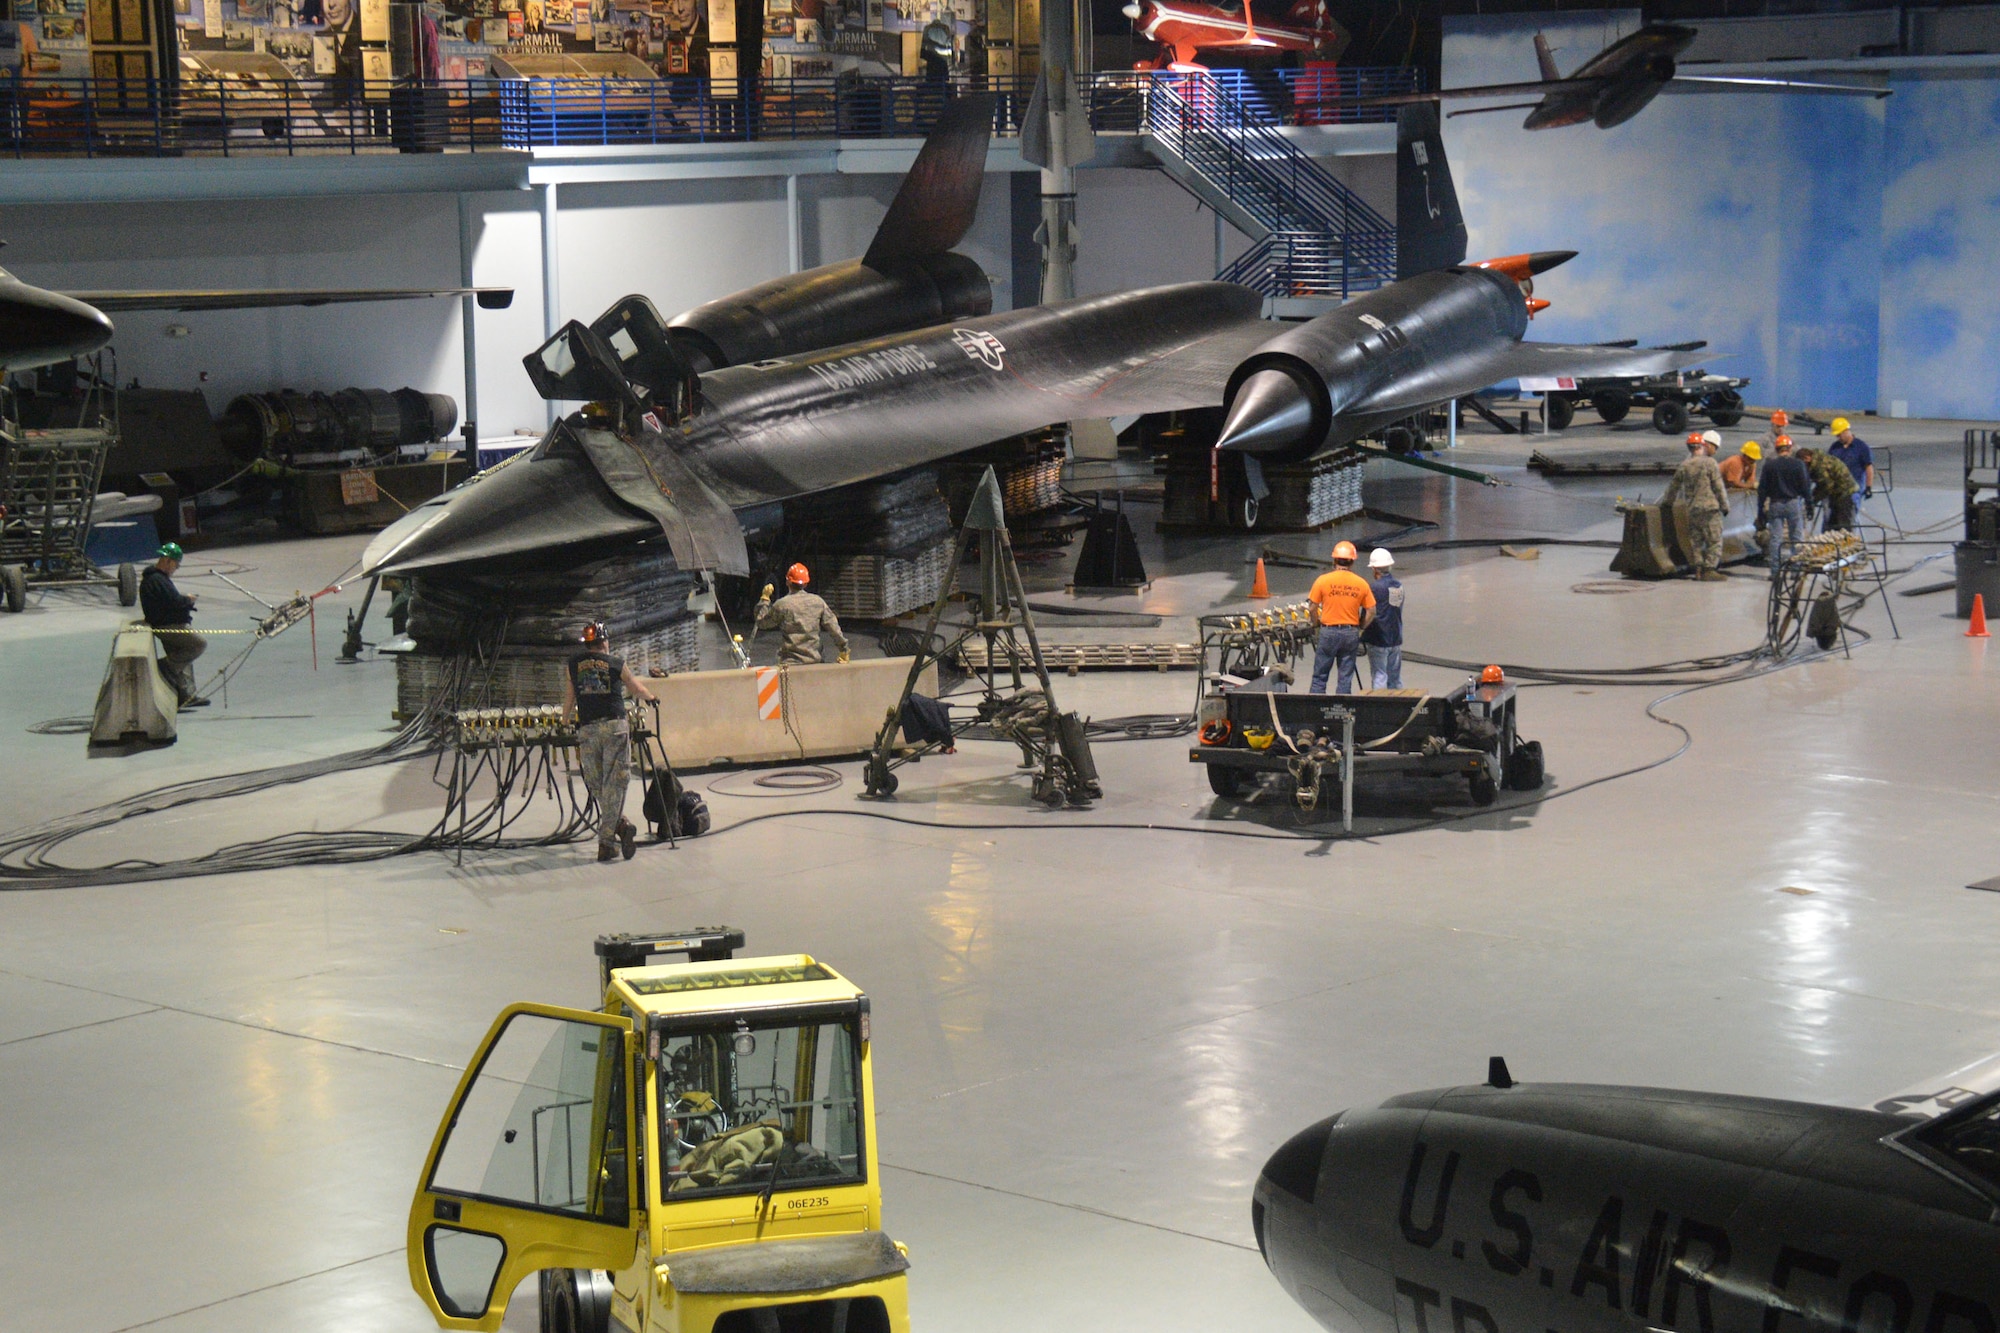 A team of Robins aircraft crash recovery personnel completes an annual exercise April 5 to raise the SR-71 Blackbird into a nose-up “take off’ position in the Museum of Aviation’s Century of Flight Hangar. (U. S. Air Force photo by Ed Aspera/Released)